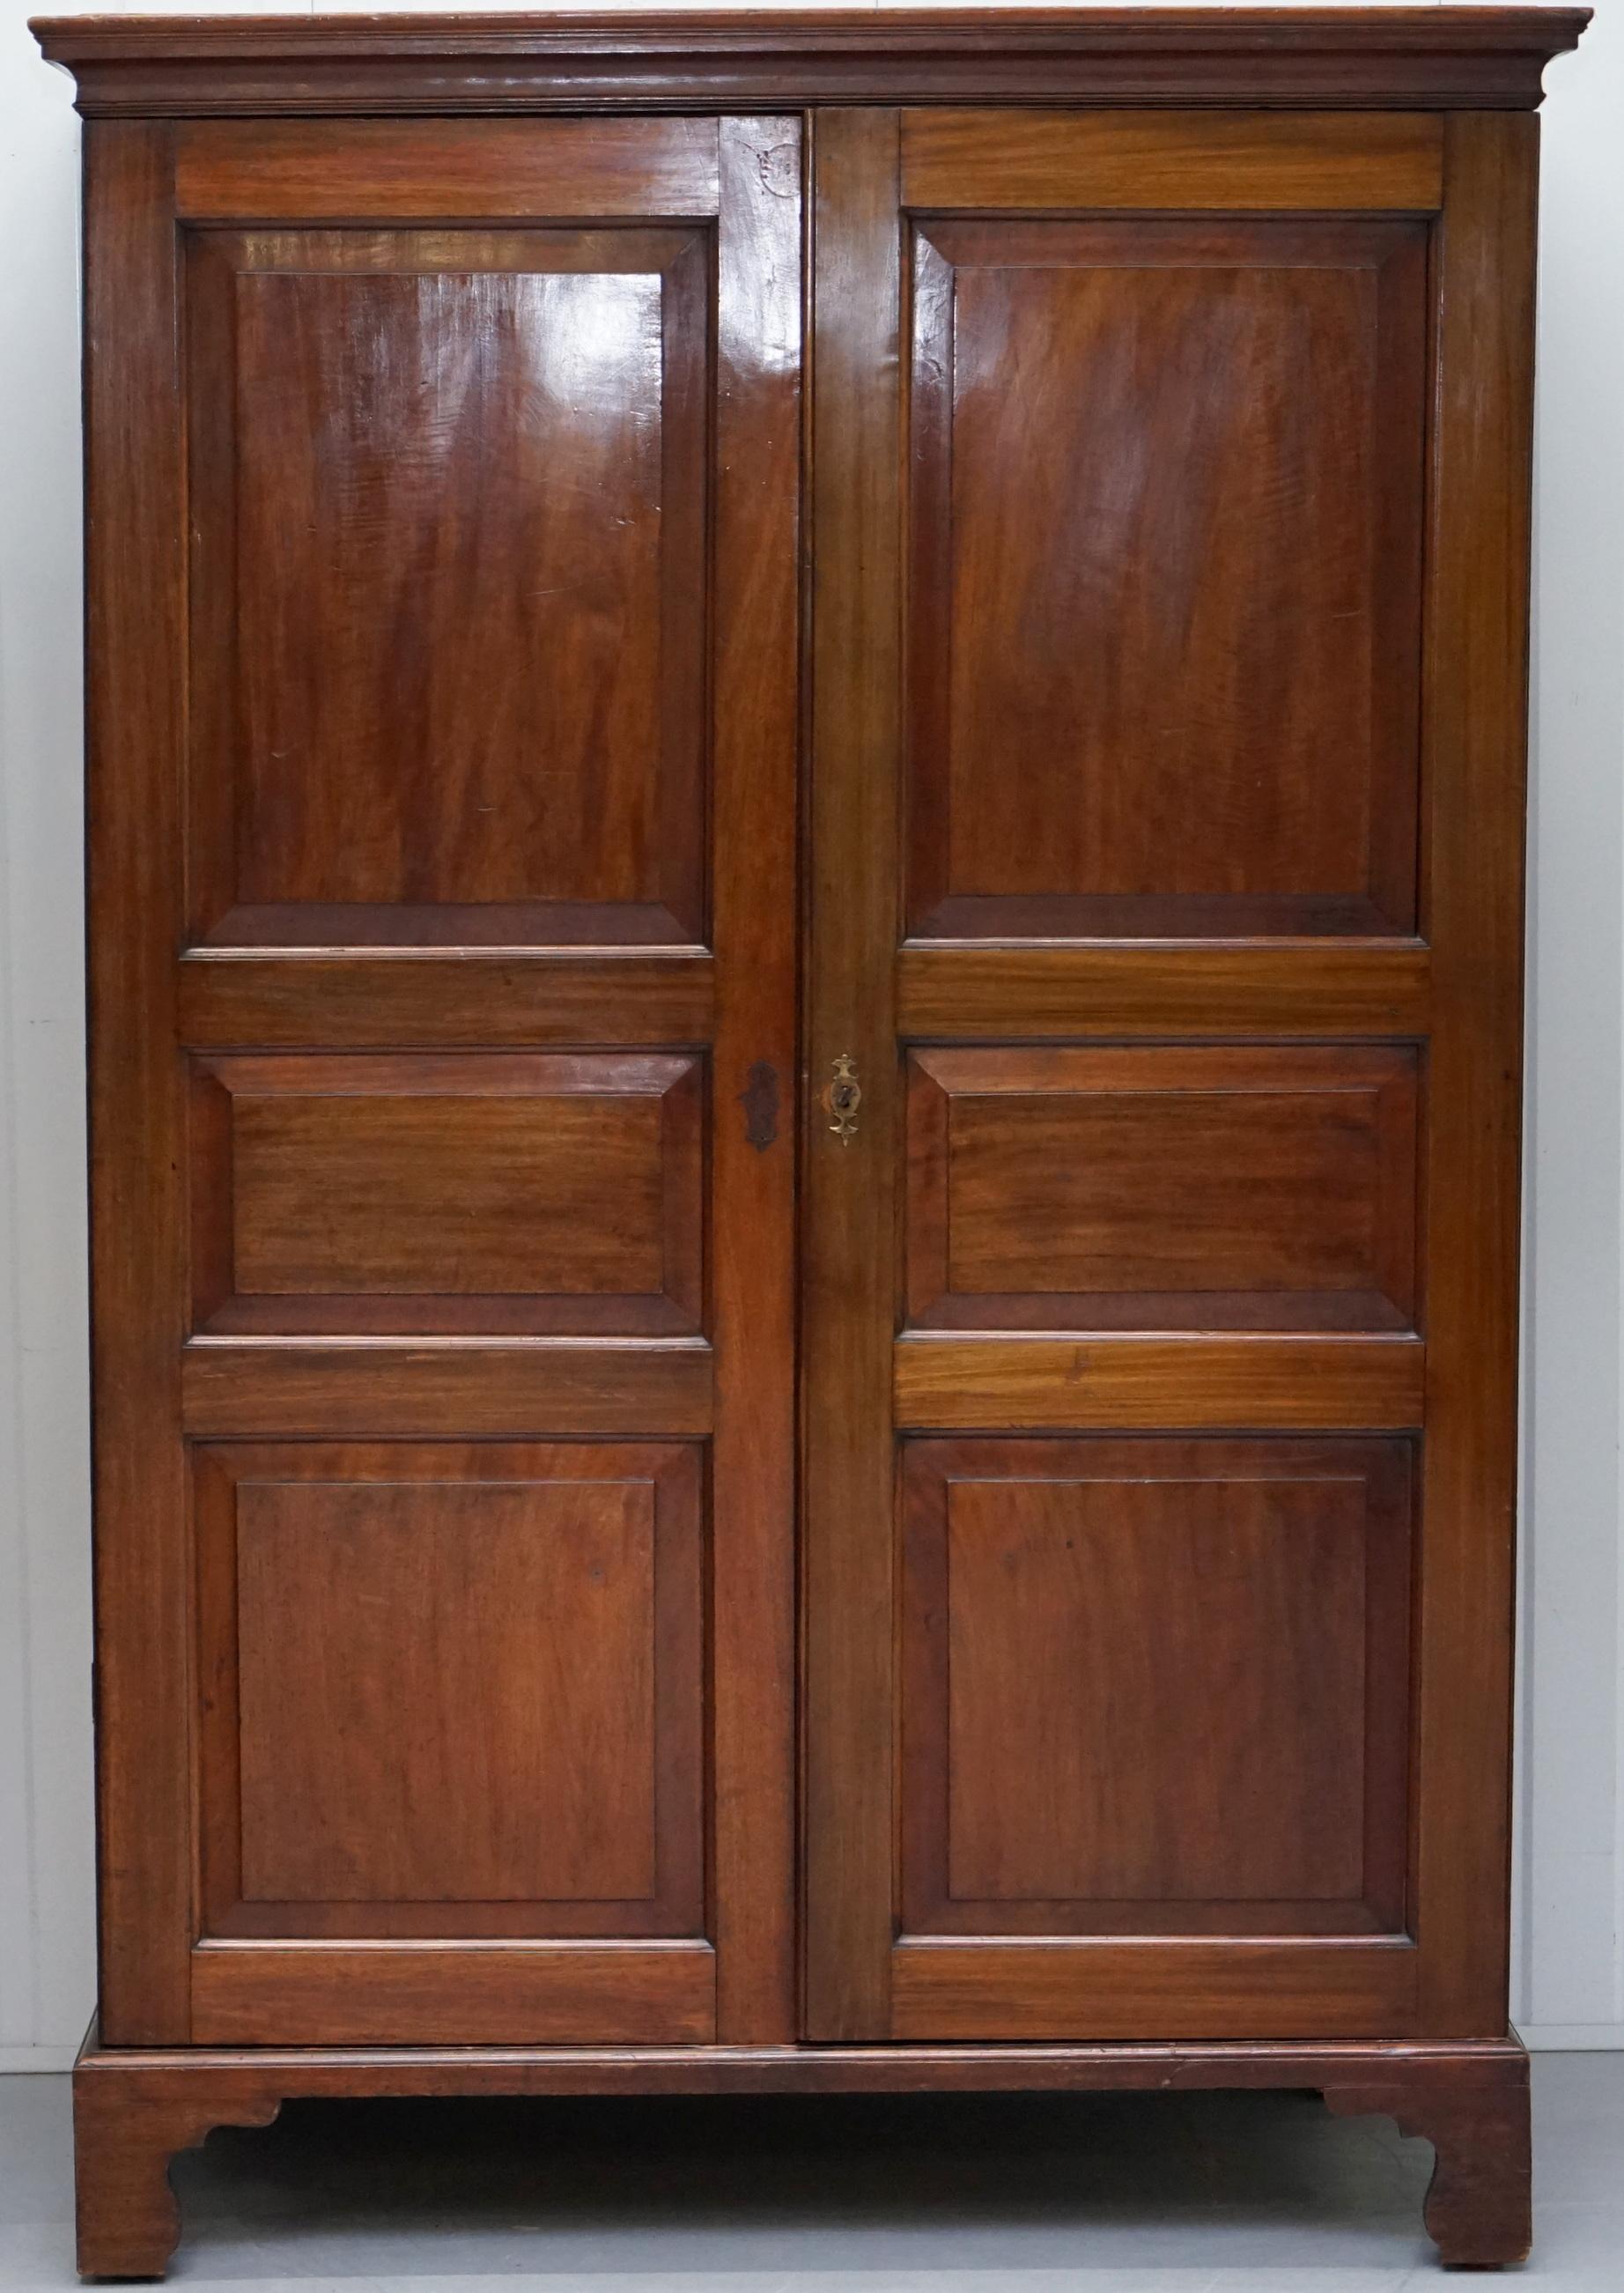 We are delighted to offer for sale this lovely panelled mahogany Georgian wardrobe, circa 1780

What can I say, a truly stunning survivor, the premium cuts of mahogany have a wonderful glow to them, the wardrobe came to us with the linen lining,